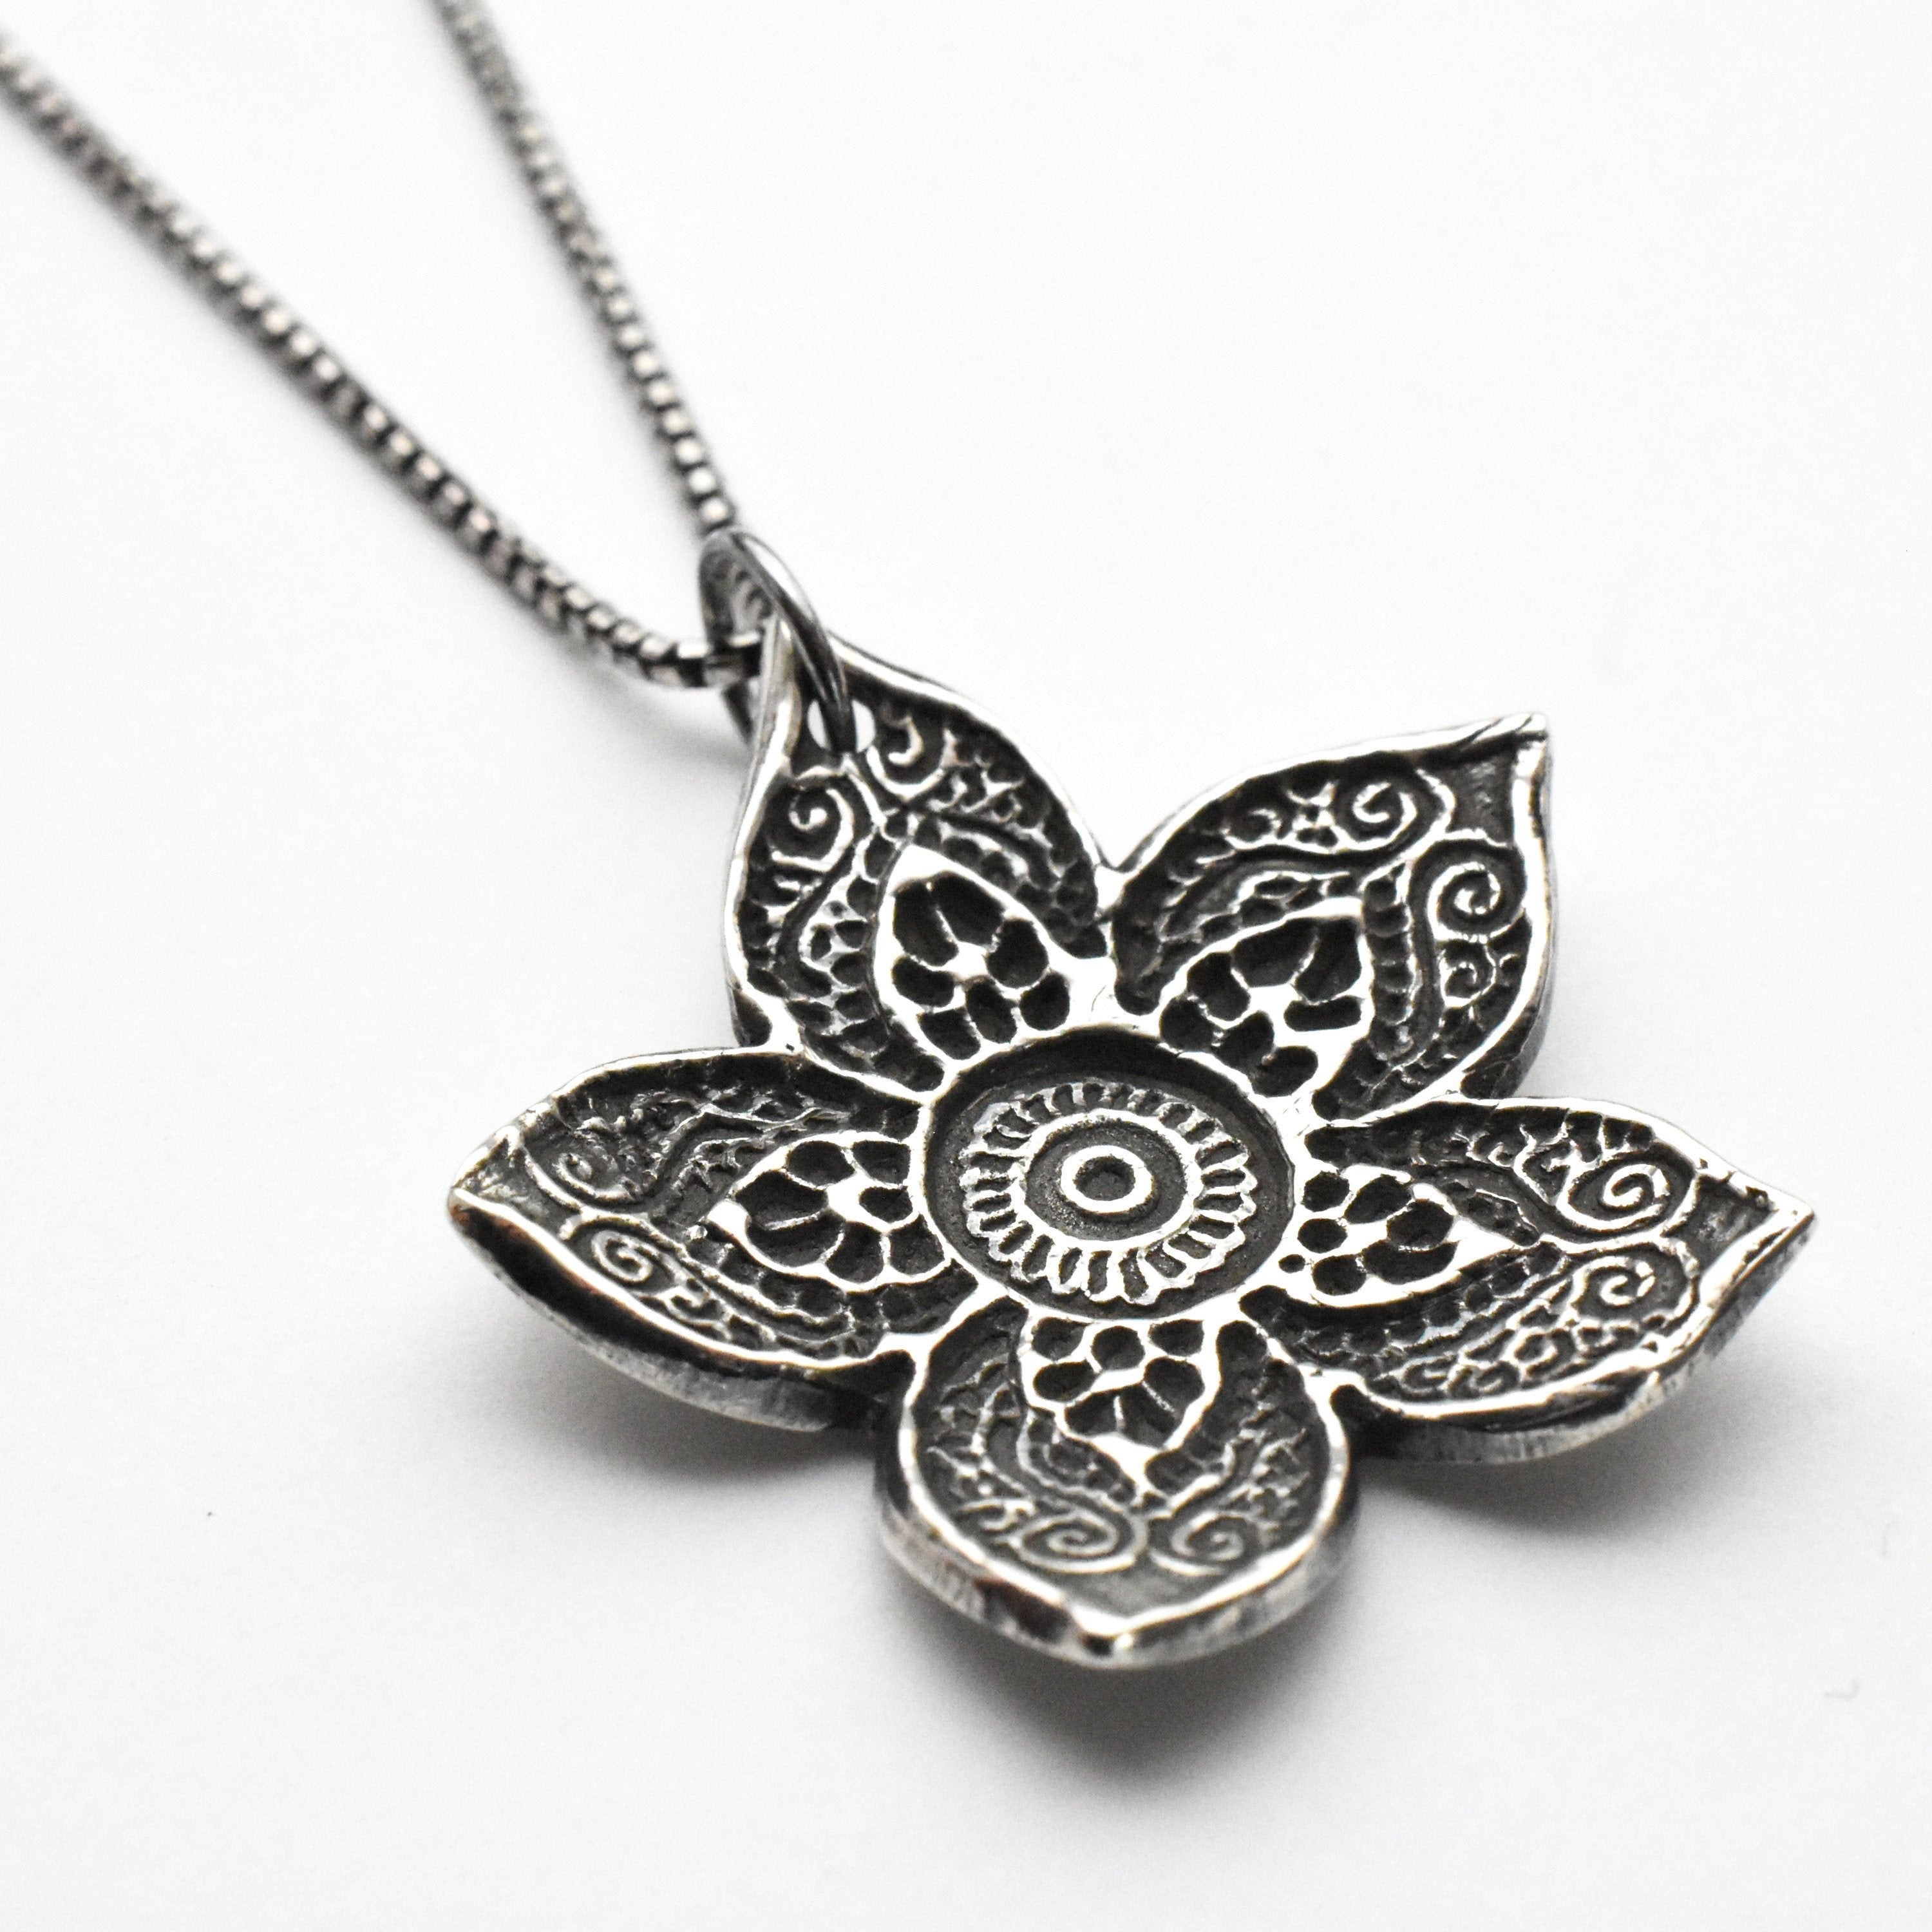 PuRui Punk Big Flower Pendant Necklace for Women Thin Metal Link Chain  Choker Charm Collar Jewelry On The Neck Party Girls New - AliExpress